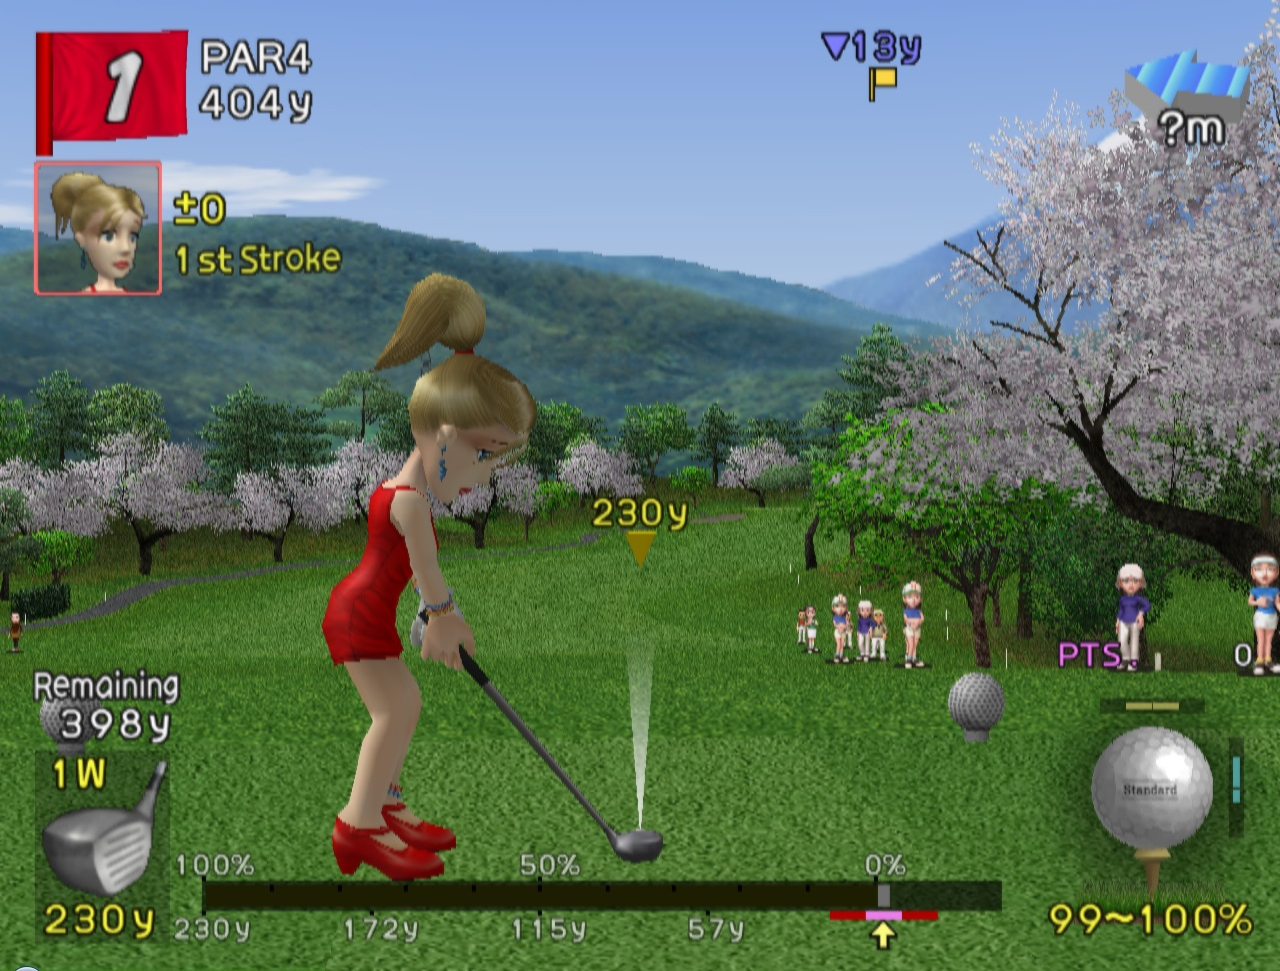 turn-to-channel-3-ps2-s-hot-shots-golf-3-can-make-everybody-a-golf-fan-nepa-scene